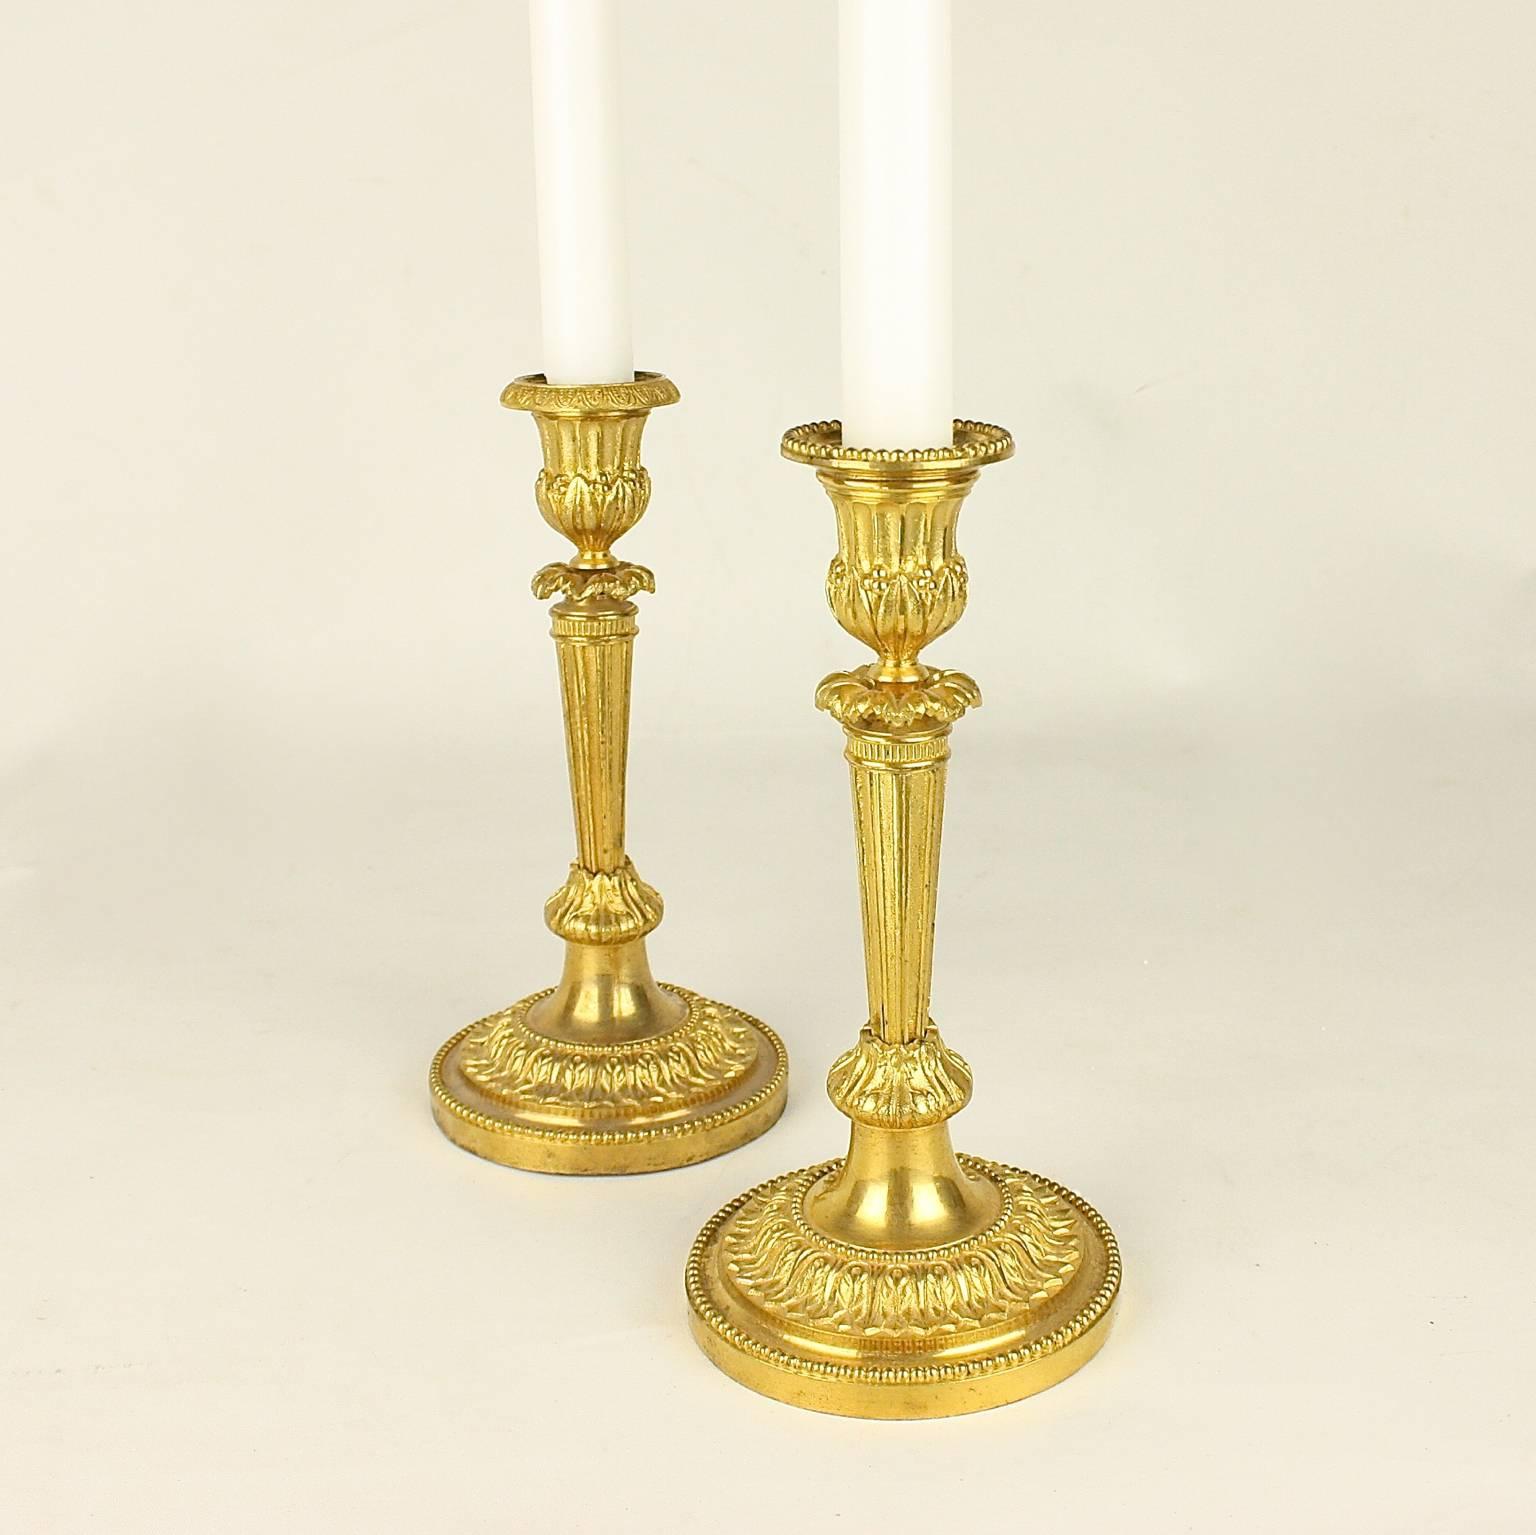 A fine pair of 18th century Louis XVI ormolu candlestick with a fluted stem topped by a ring of prominent leaves supporting the fluted socket, chiseled with foliage. The removable nozzle heightened with fine pearls, resting on a round base richly